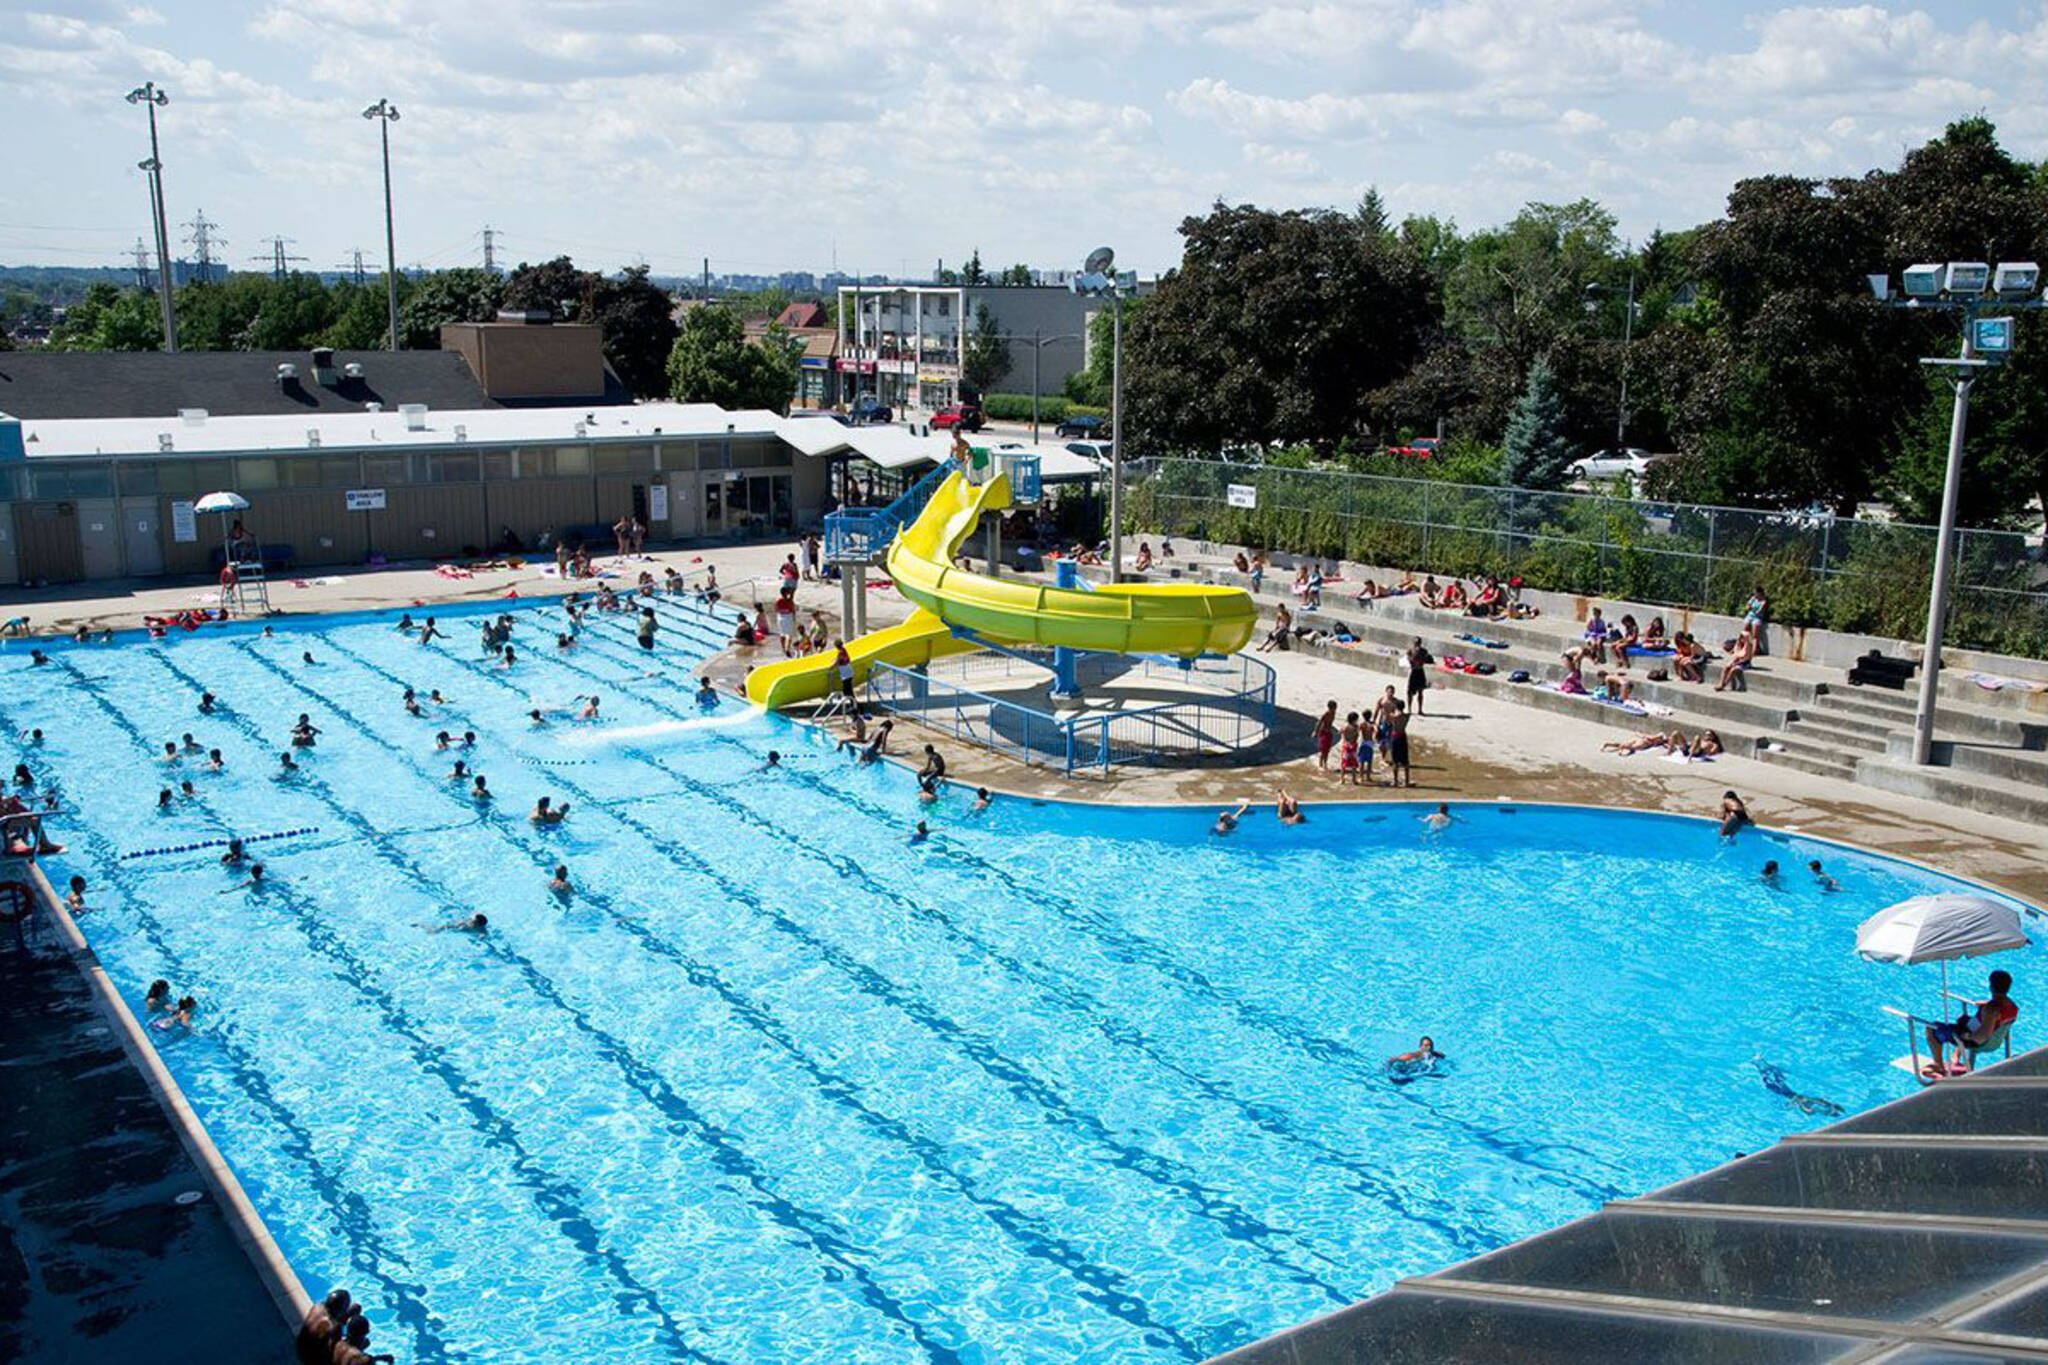 Toronto outdoor pools and wading pools are now fully open